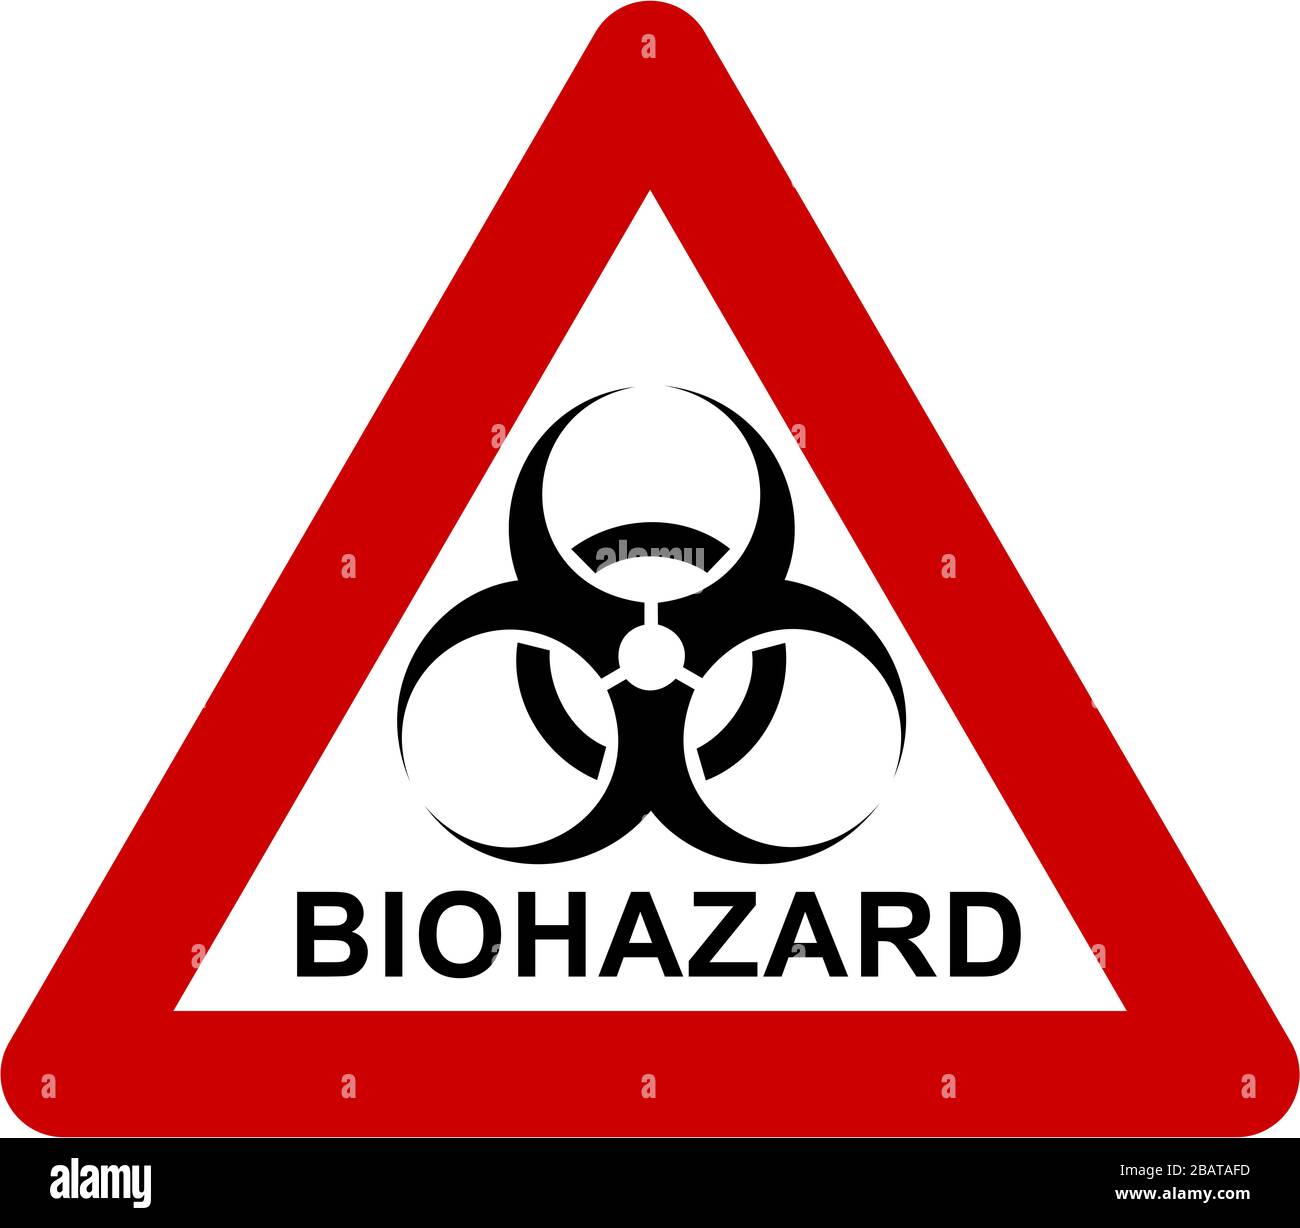 Warning sign with biohazard symbol and BIOHAZARD text Stock Photo